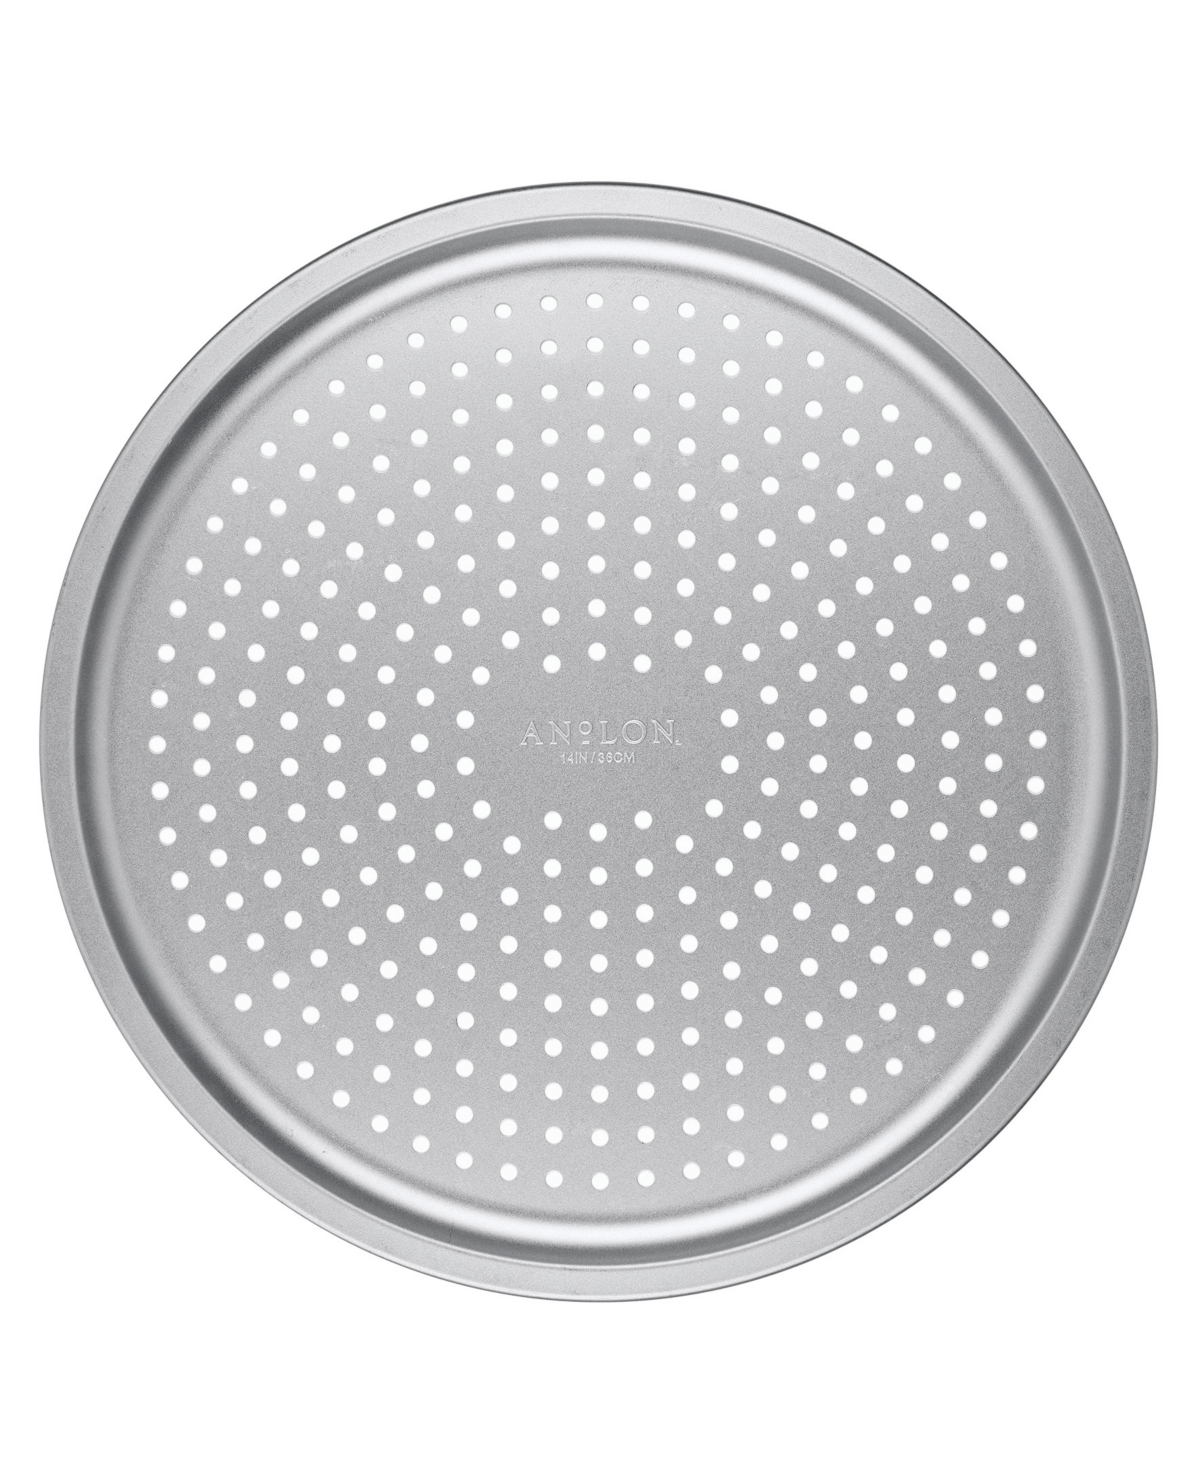 Anolon Pro-Bake Bakeware Aluminized Steel Perforated Pizza Pan, 14